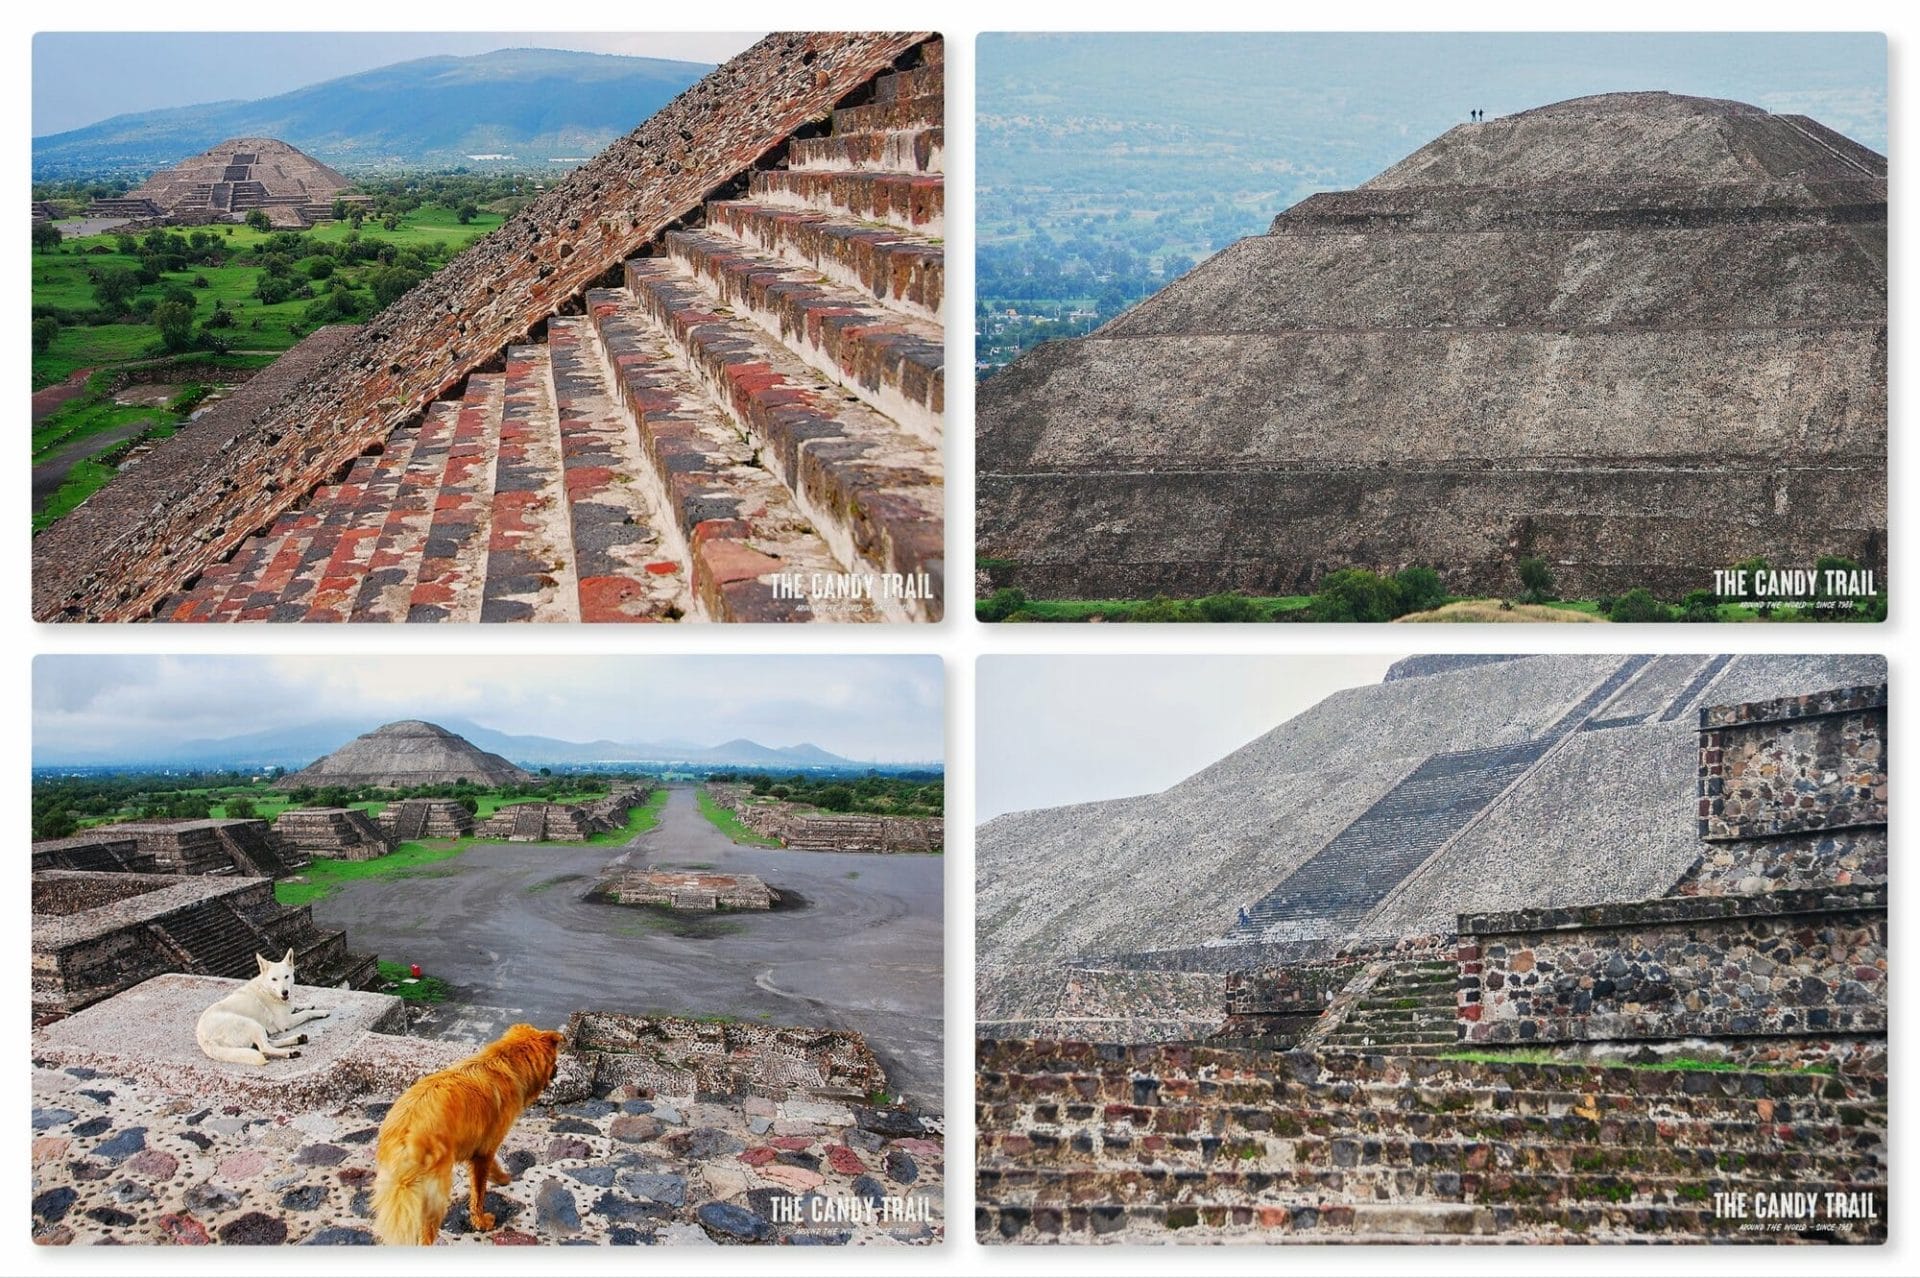 Tranquility and bliss at the Sun and Moon pyramids at Teotihuacan in Mexico - 2009.